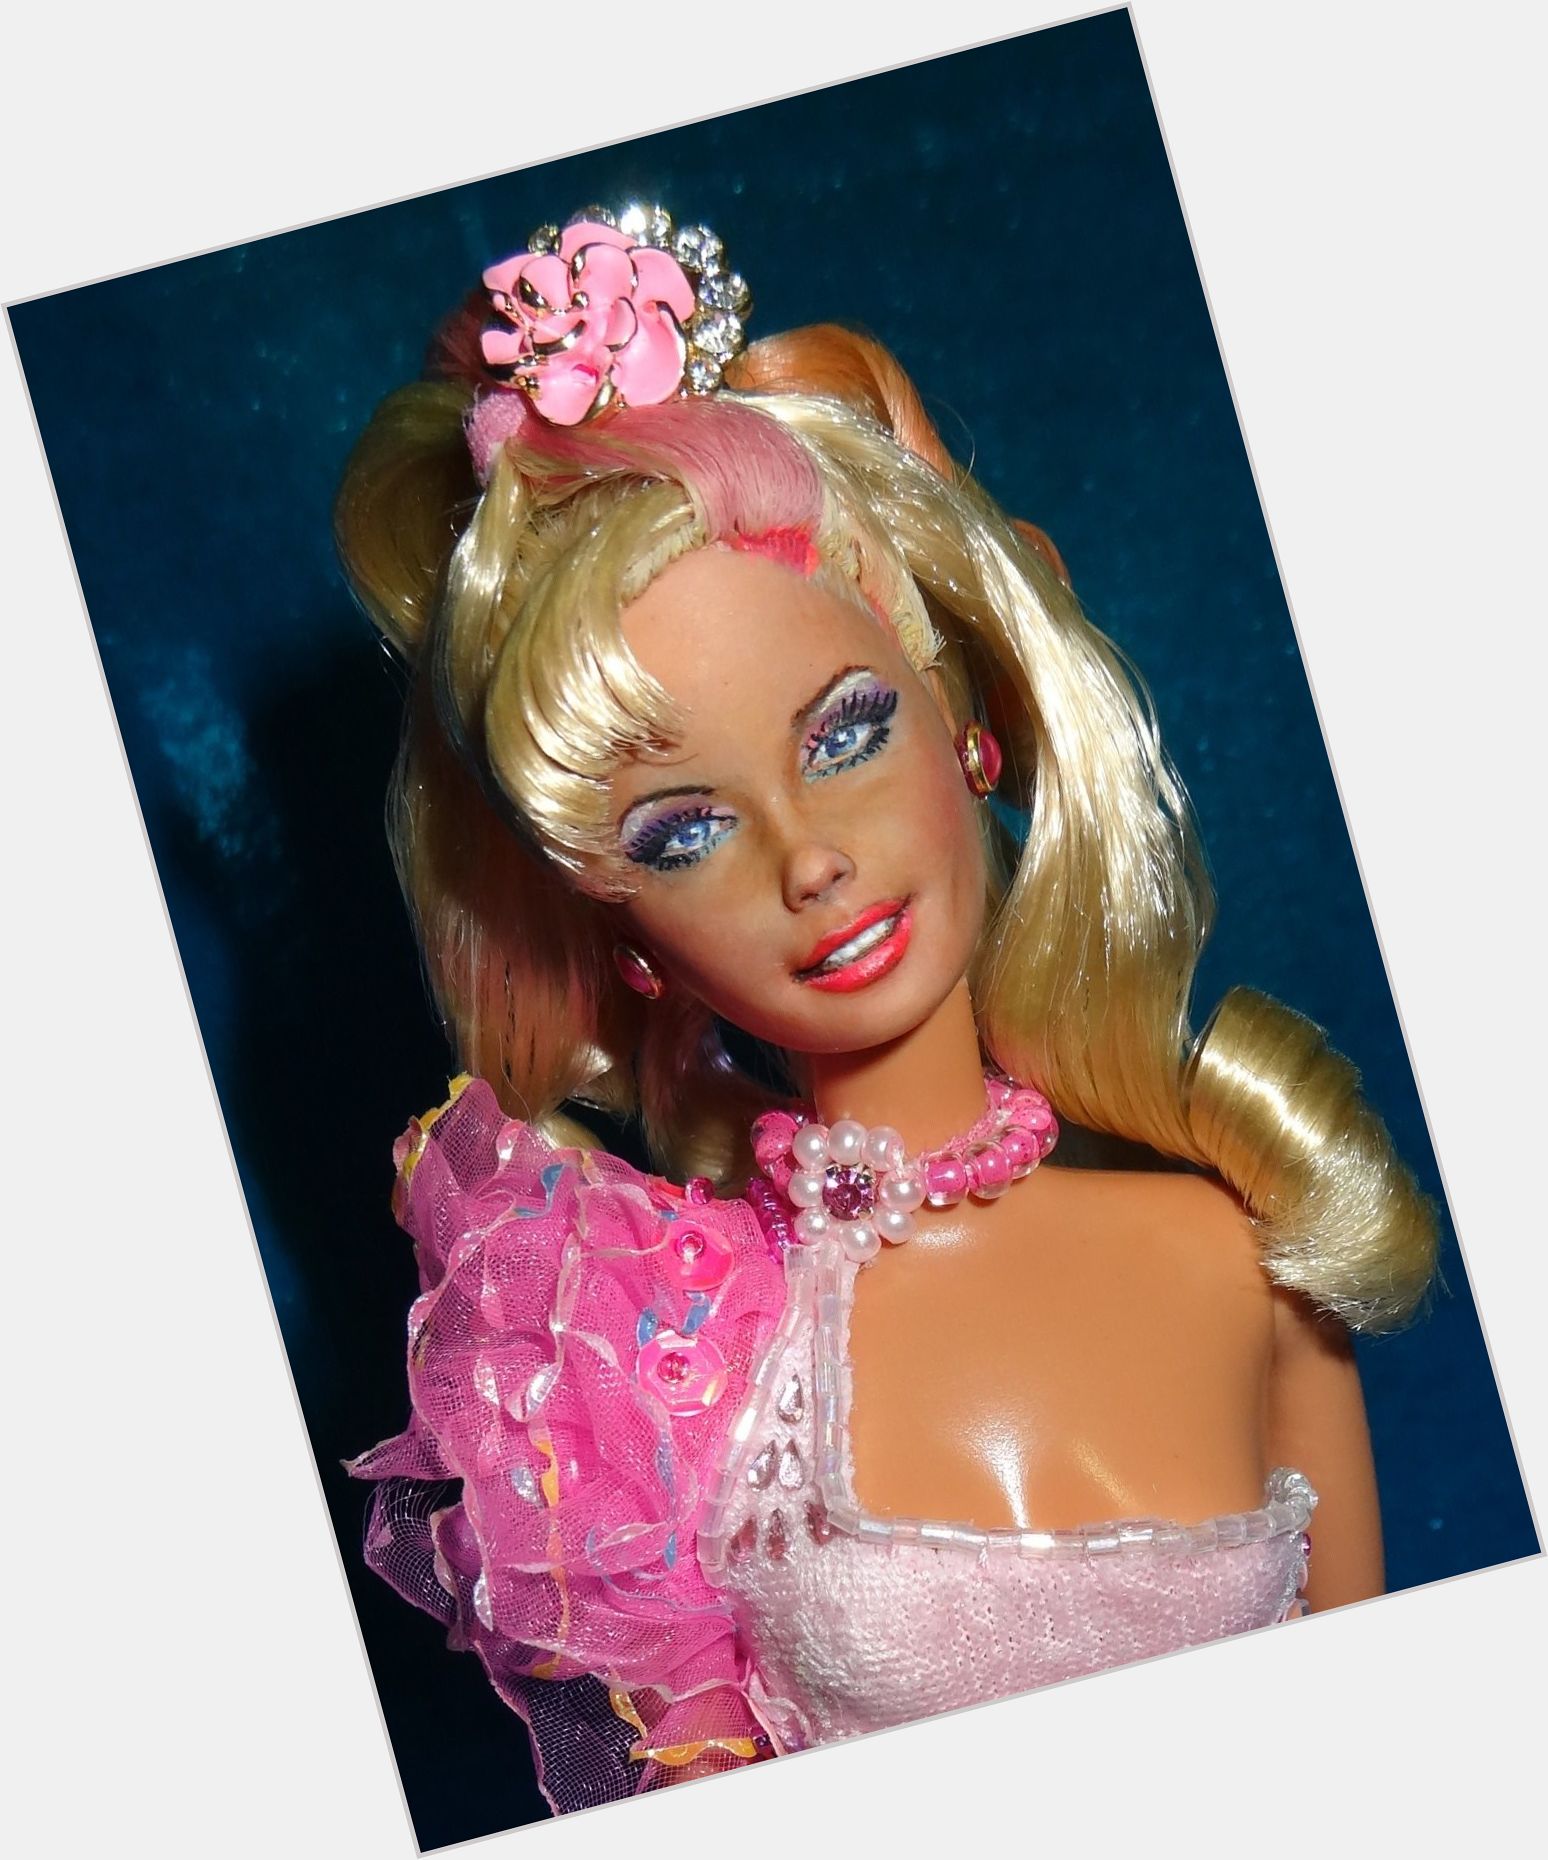 <a href="/hot-women/barbie-doll/is-she-proper-noun-capitalized-real-icon-illuminati">Barbie Doll</a>  blonde hair & hairstyles